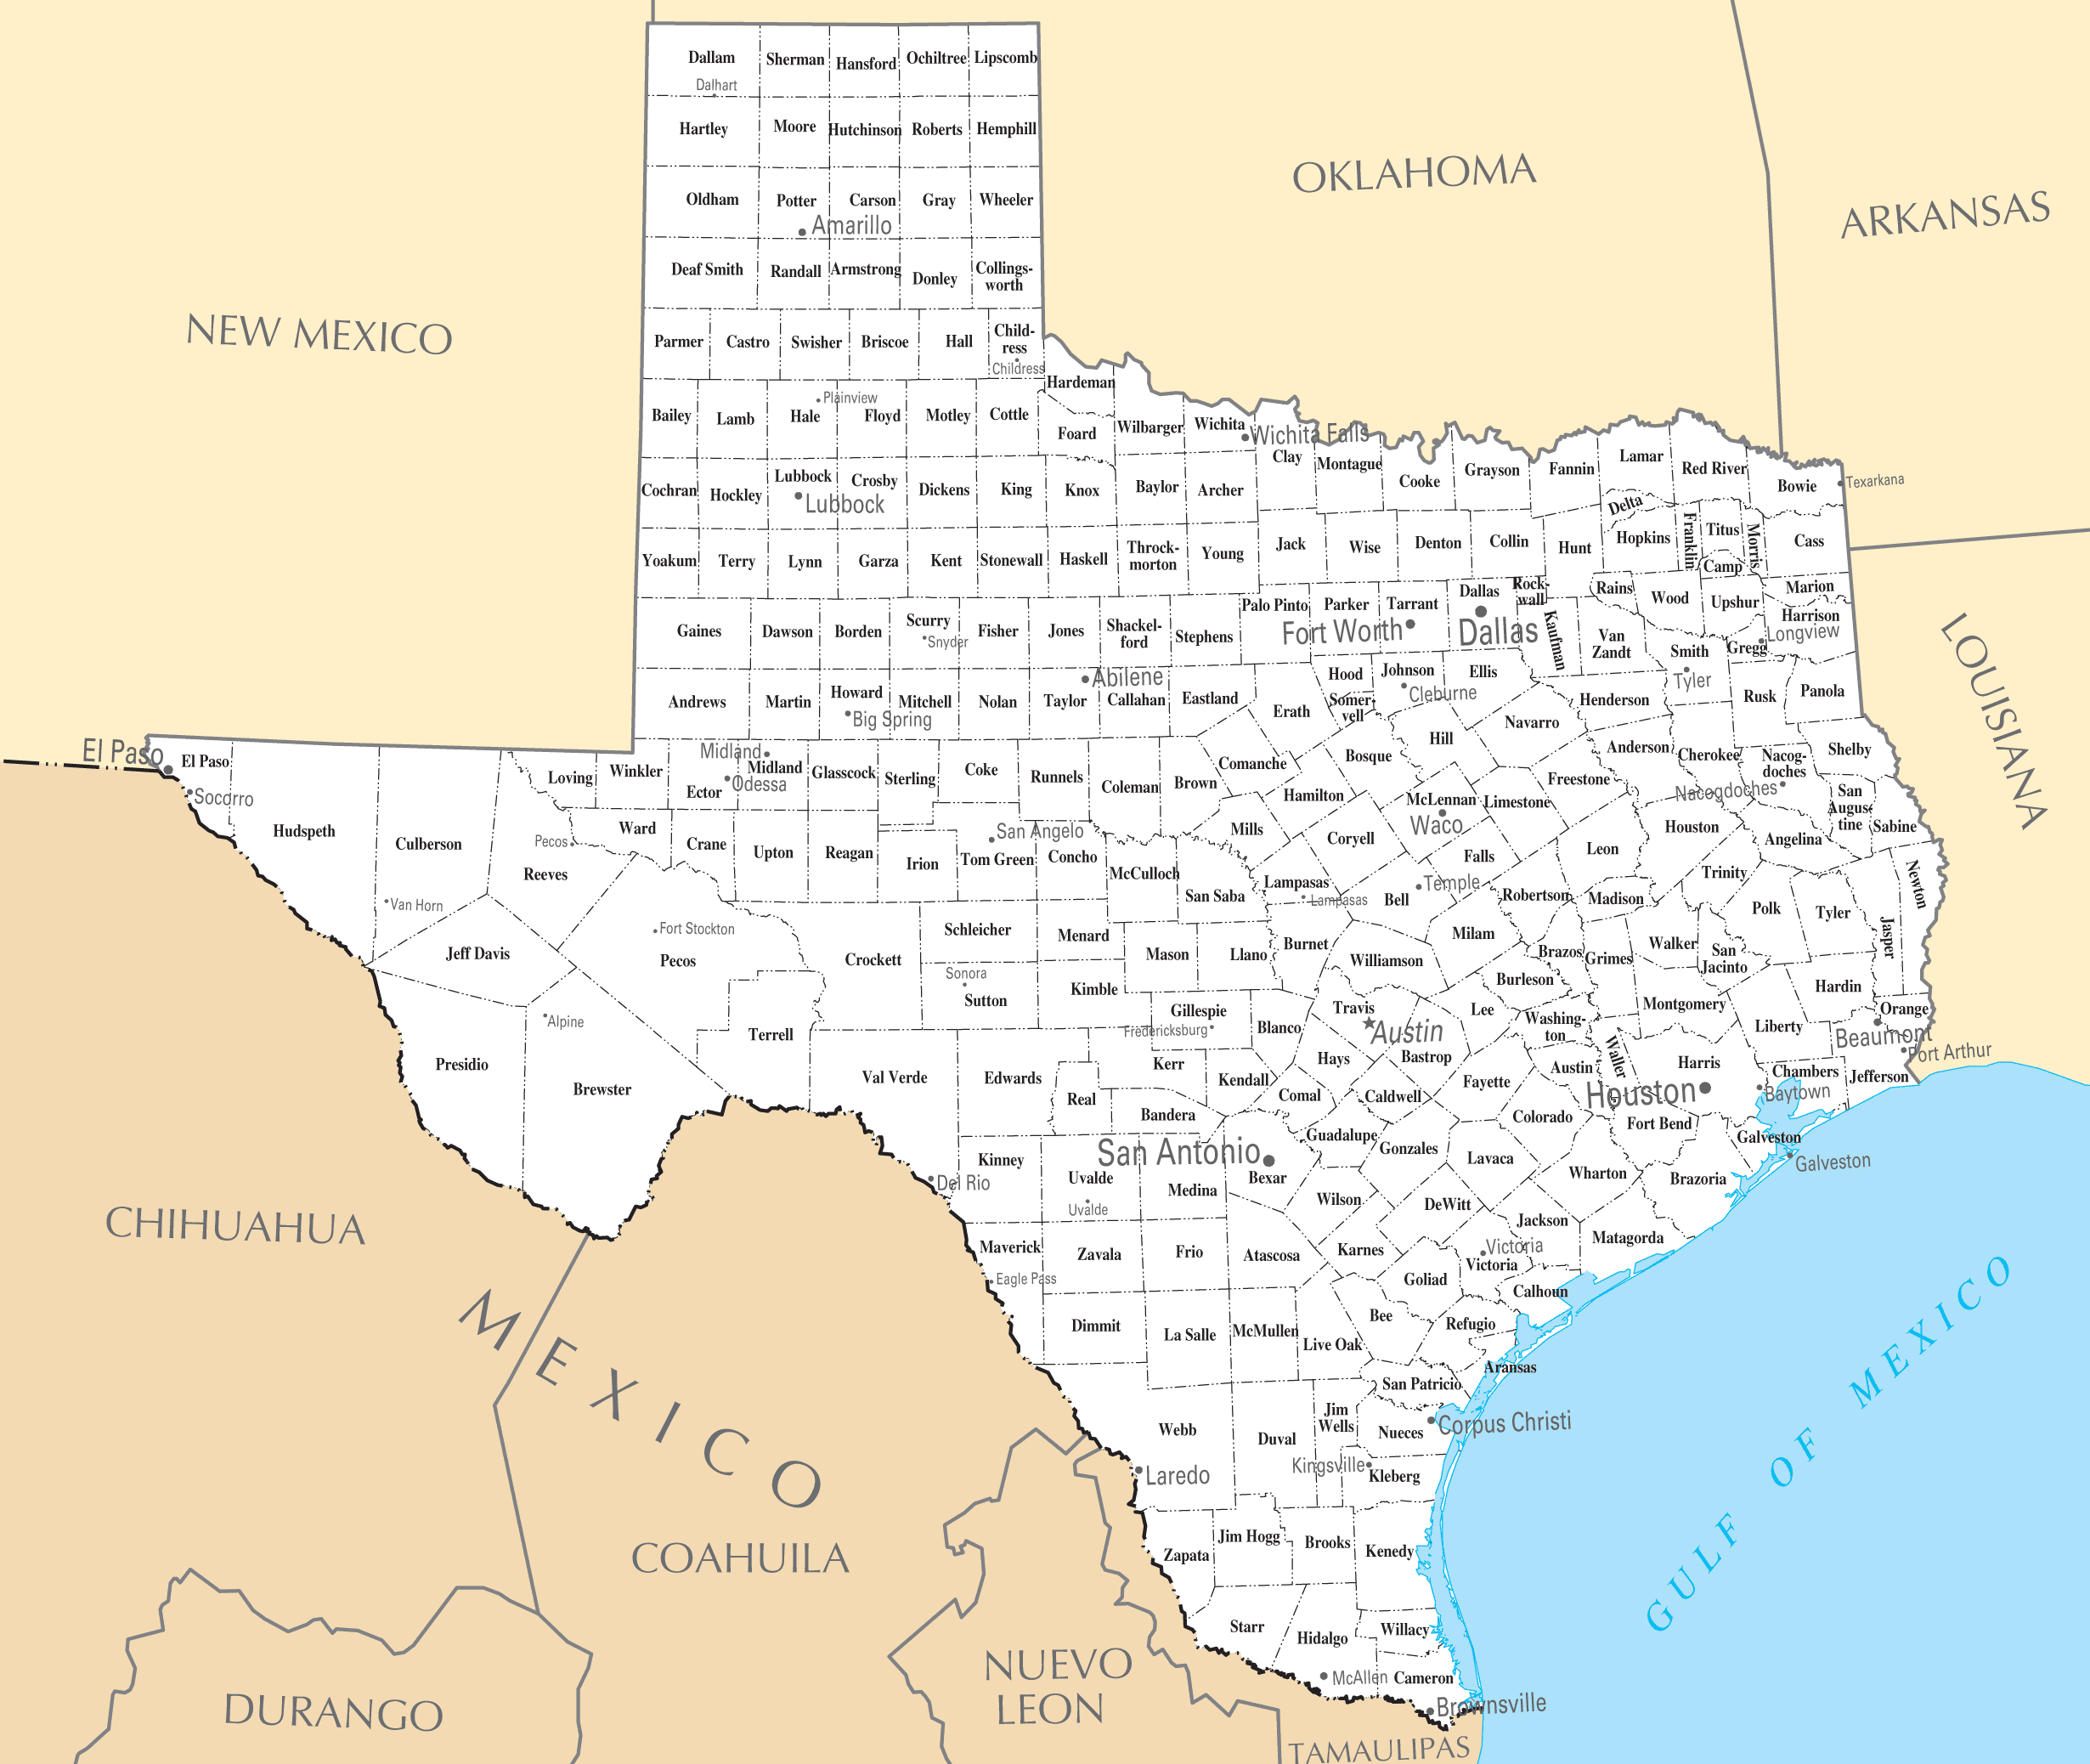 List of: Cities and Towns in Texas